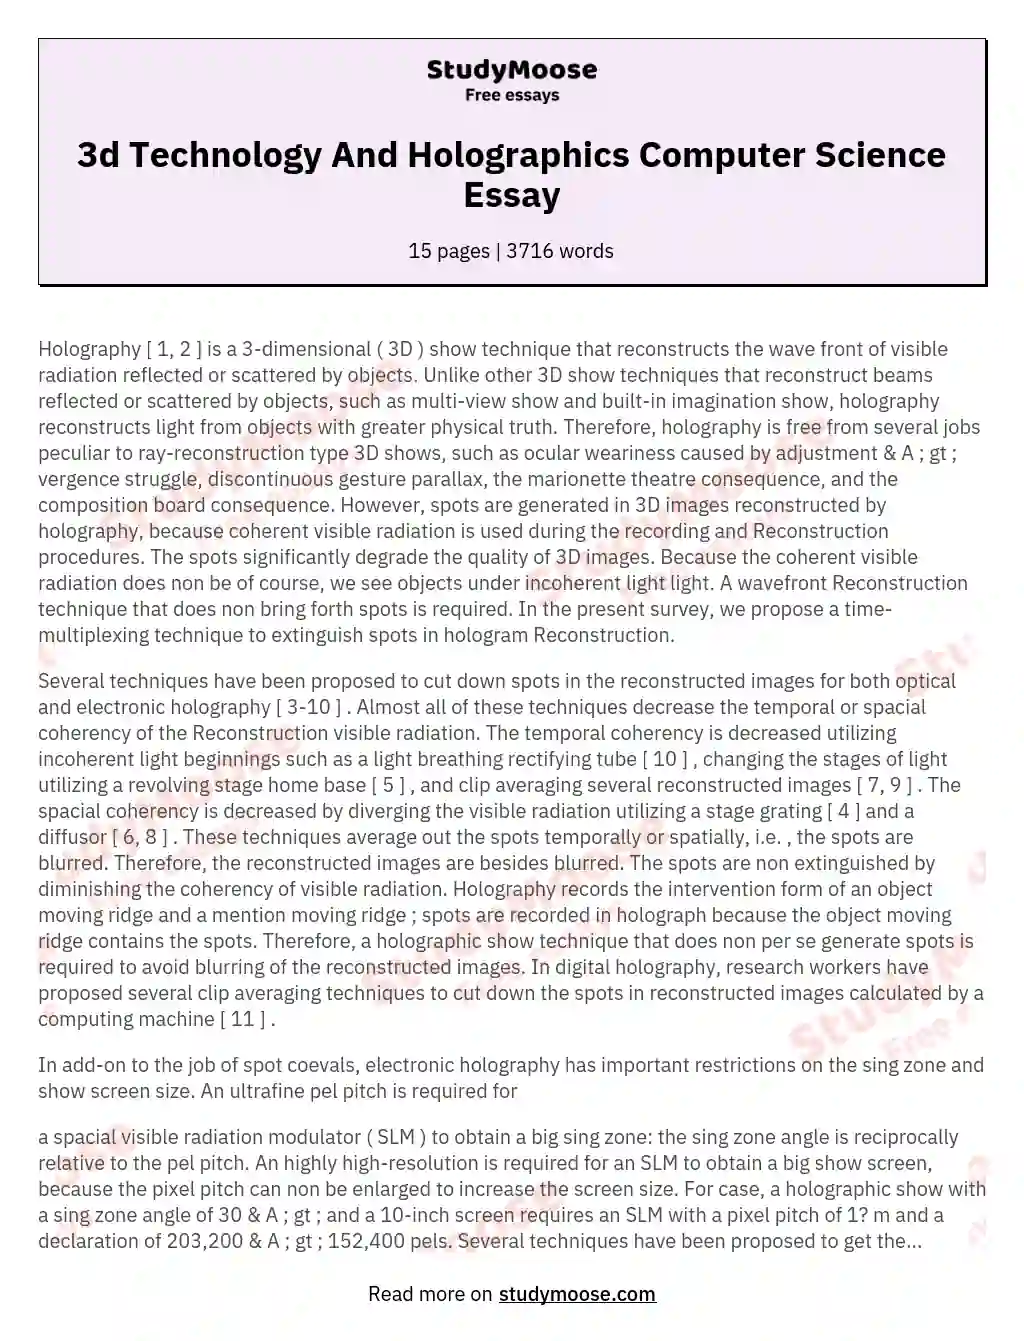 3d Technology And Holographics Computer Science Essay essay